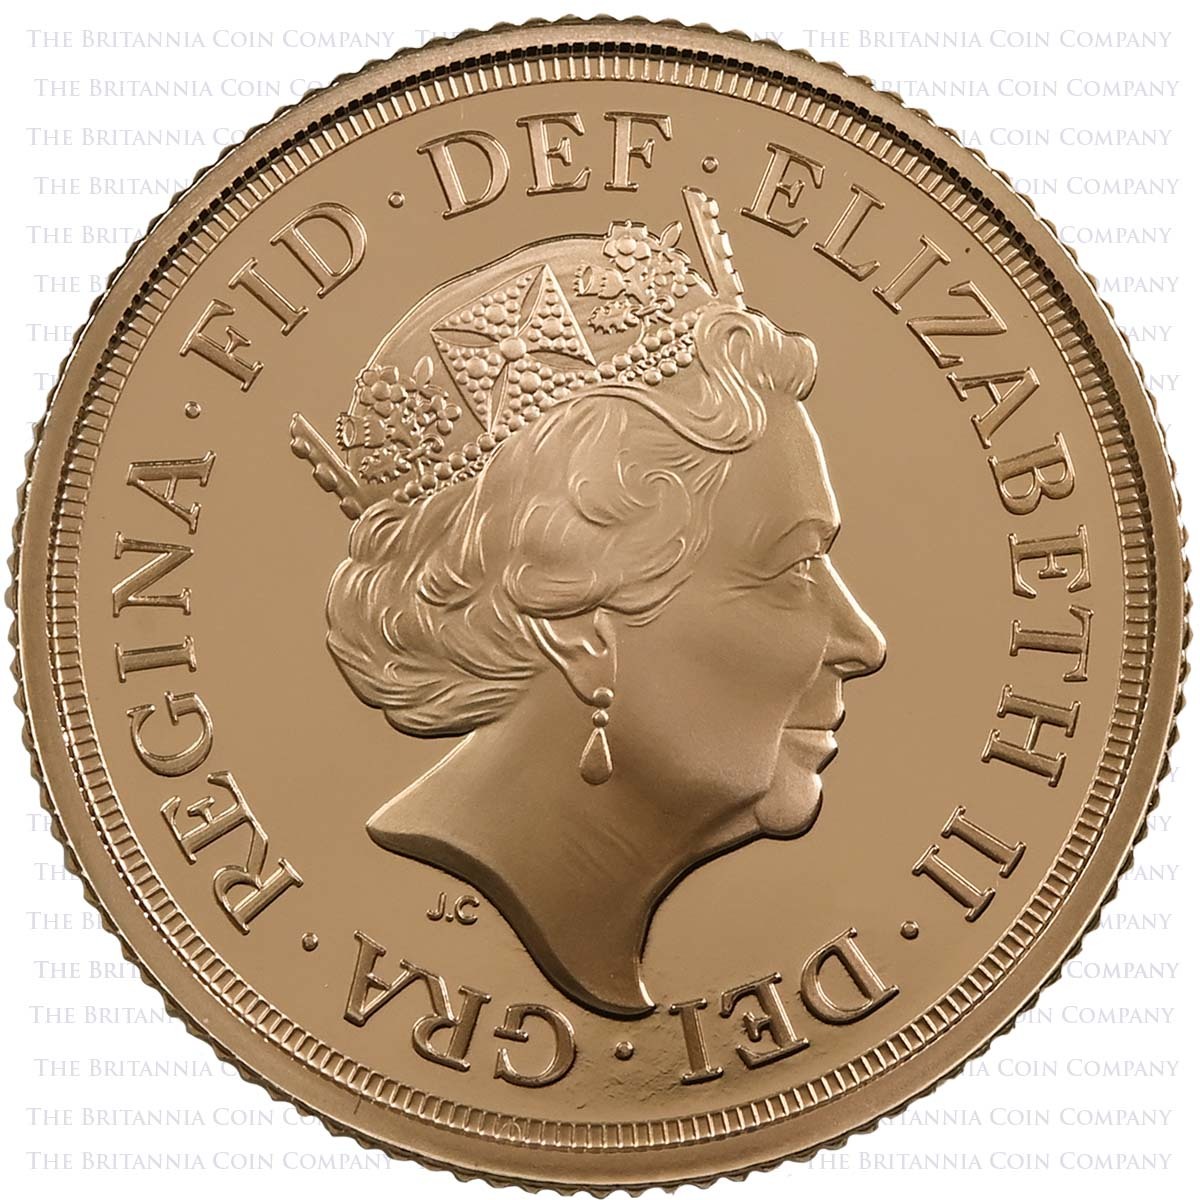 2019 Proof Sovereign - Obverse